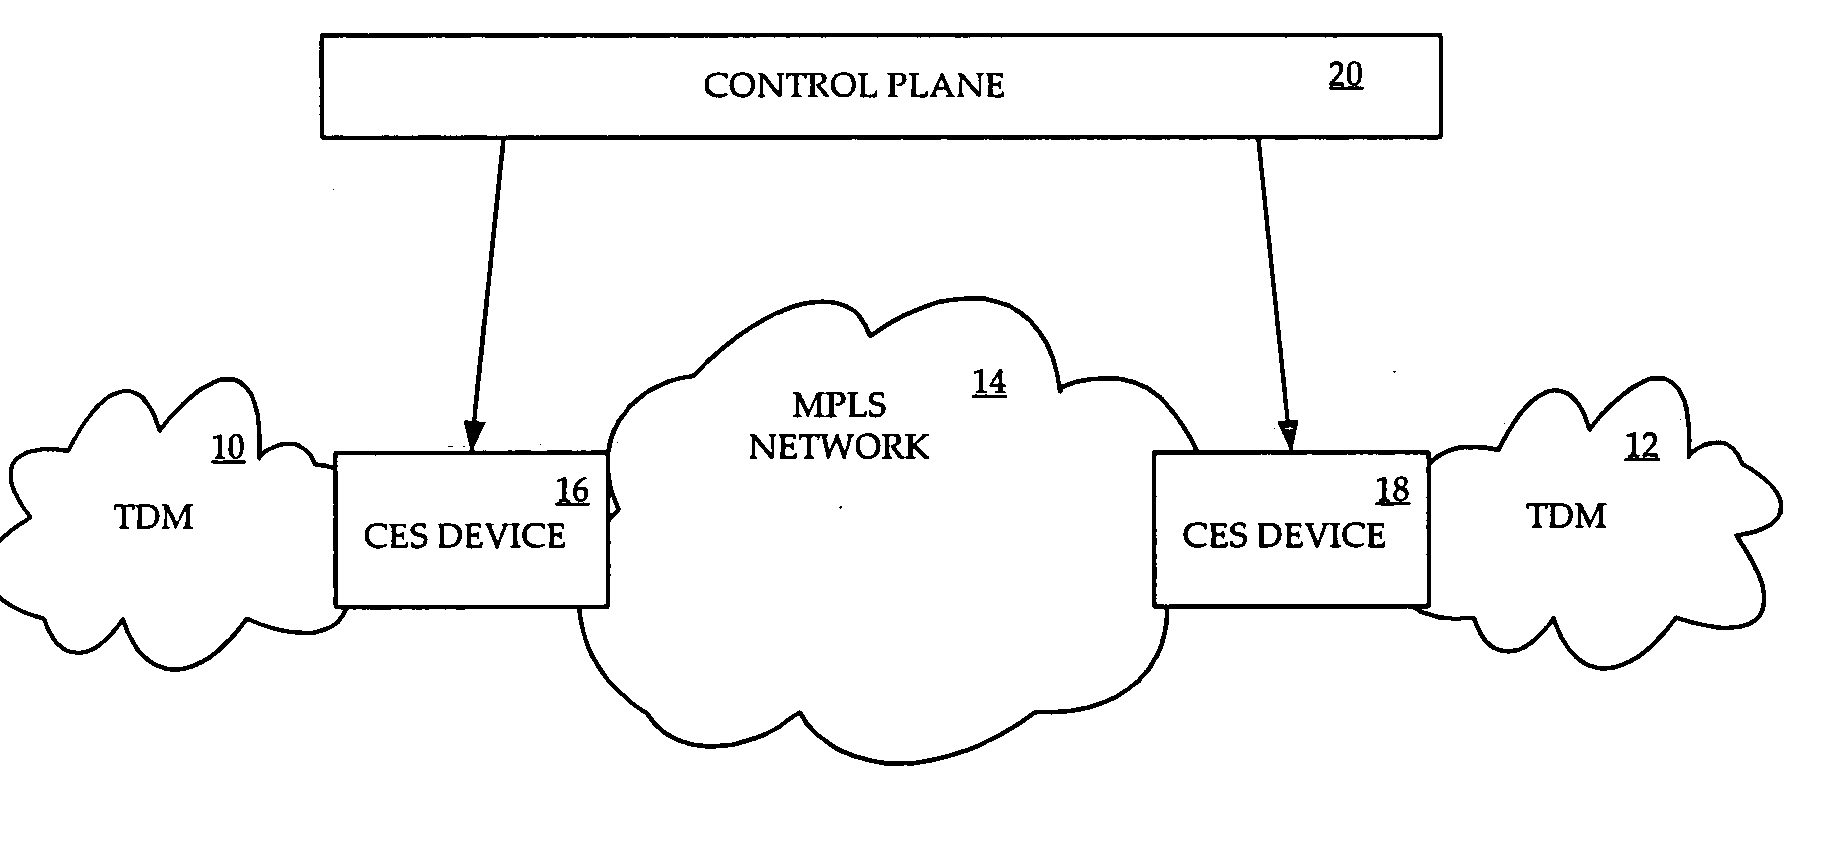 Interworking circuit emulation service over packet and IP/MPLS packet processing